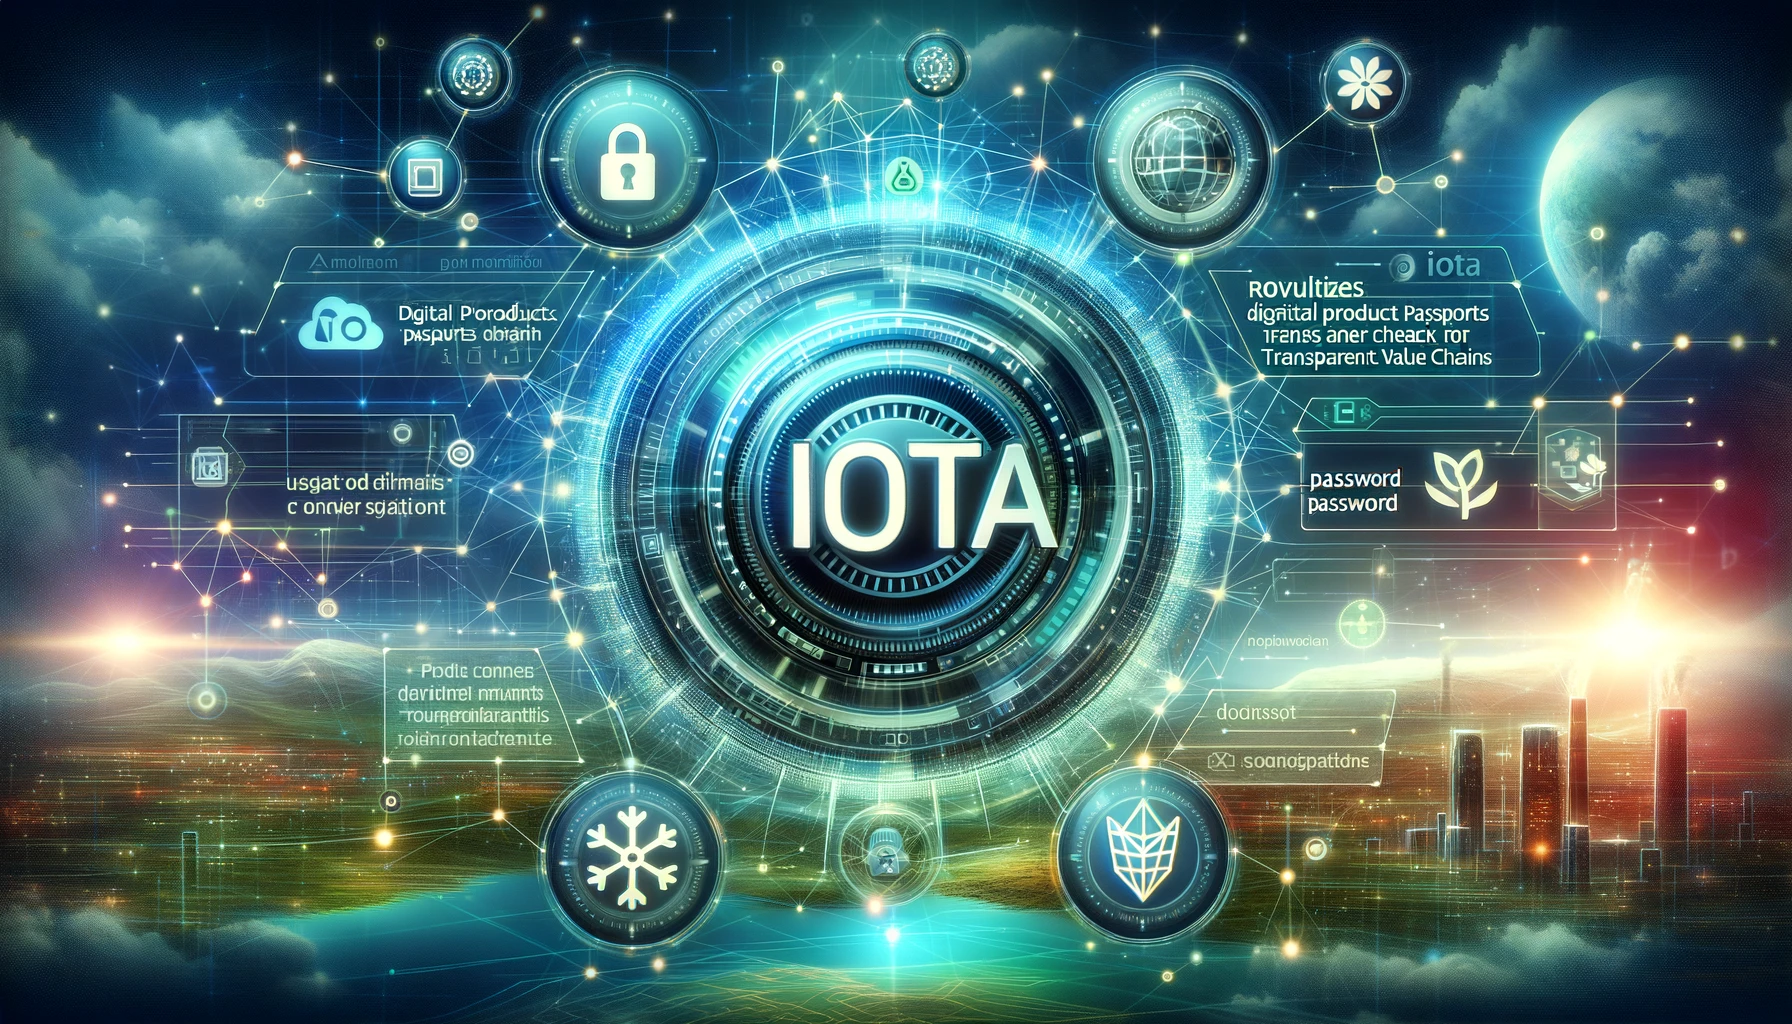 IOTA Joins EU EBSI Finalists Chromaway and BillonGroup in Presenting Pioneering Use Cases